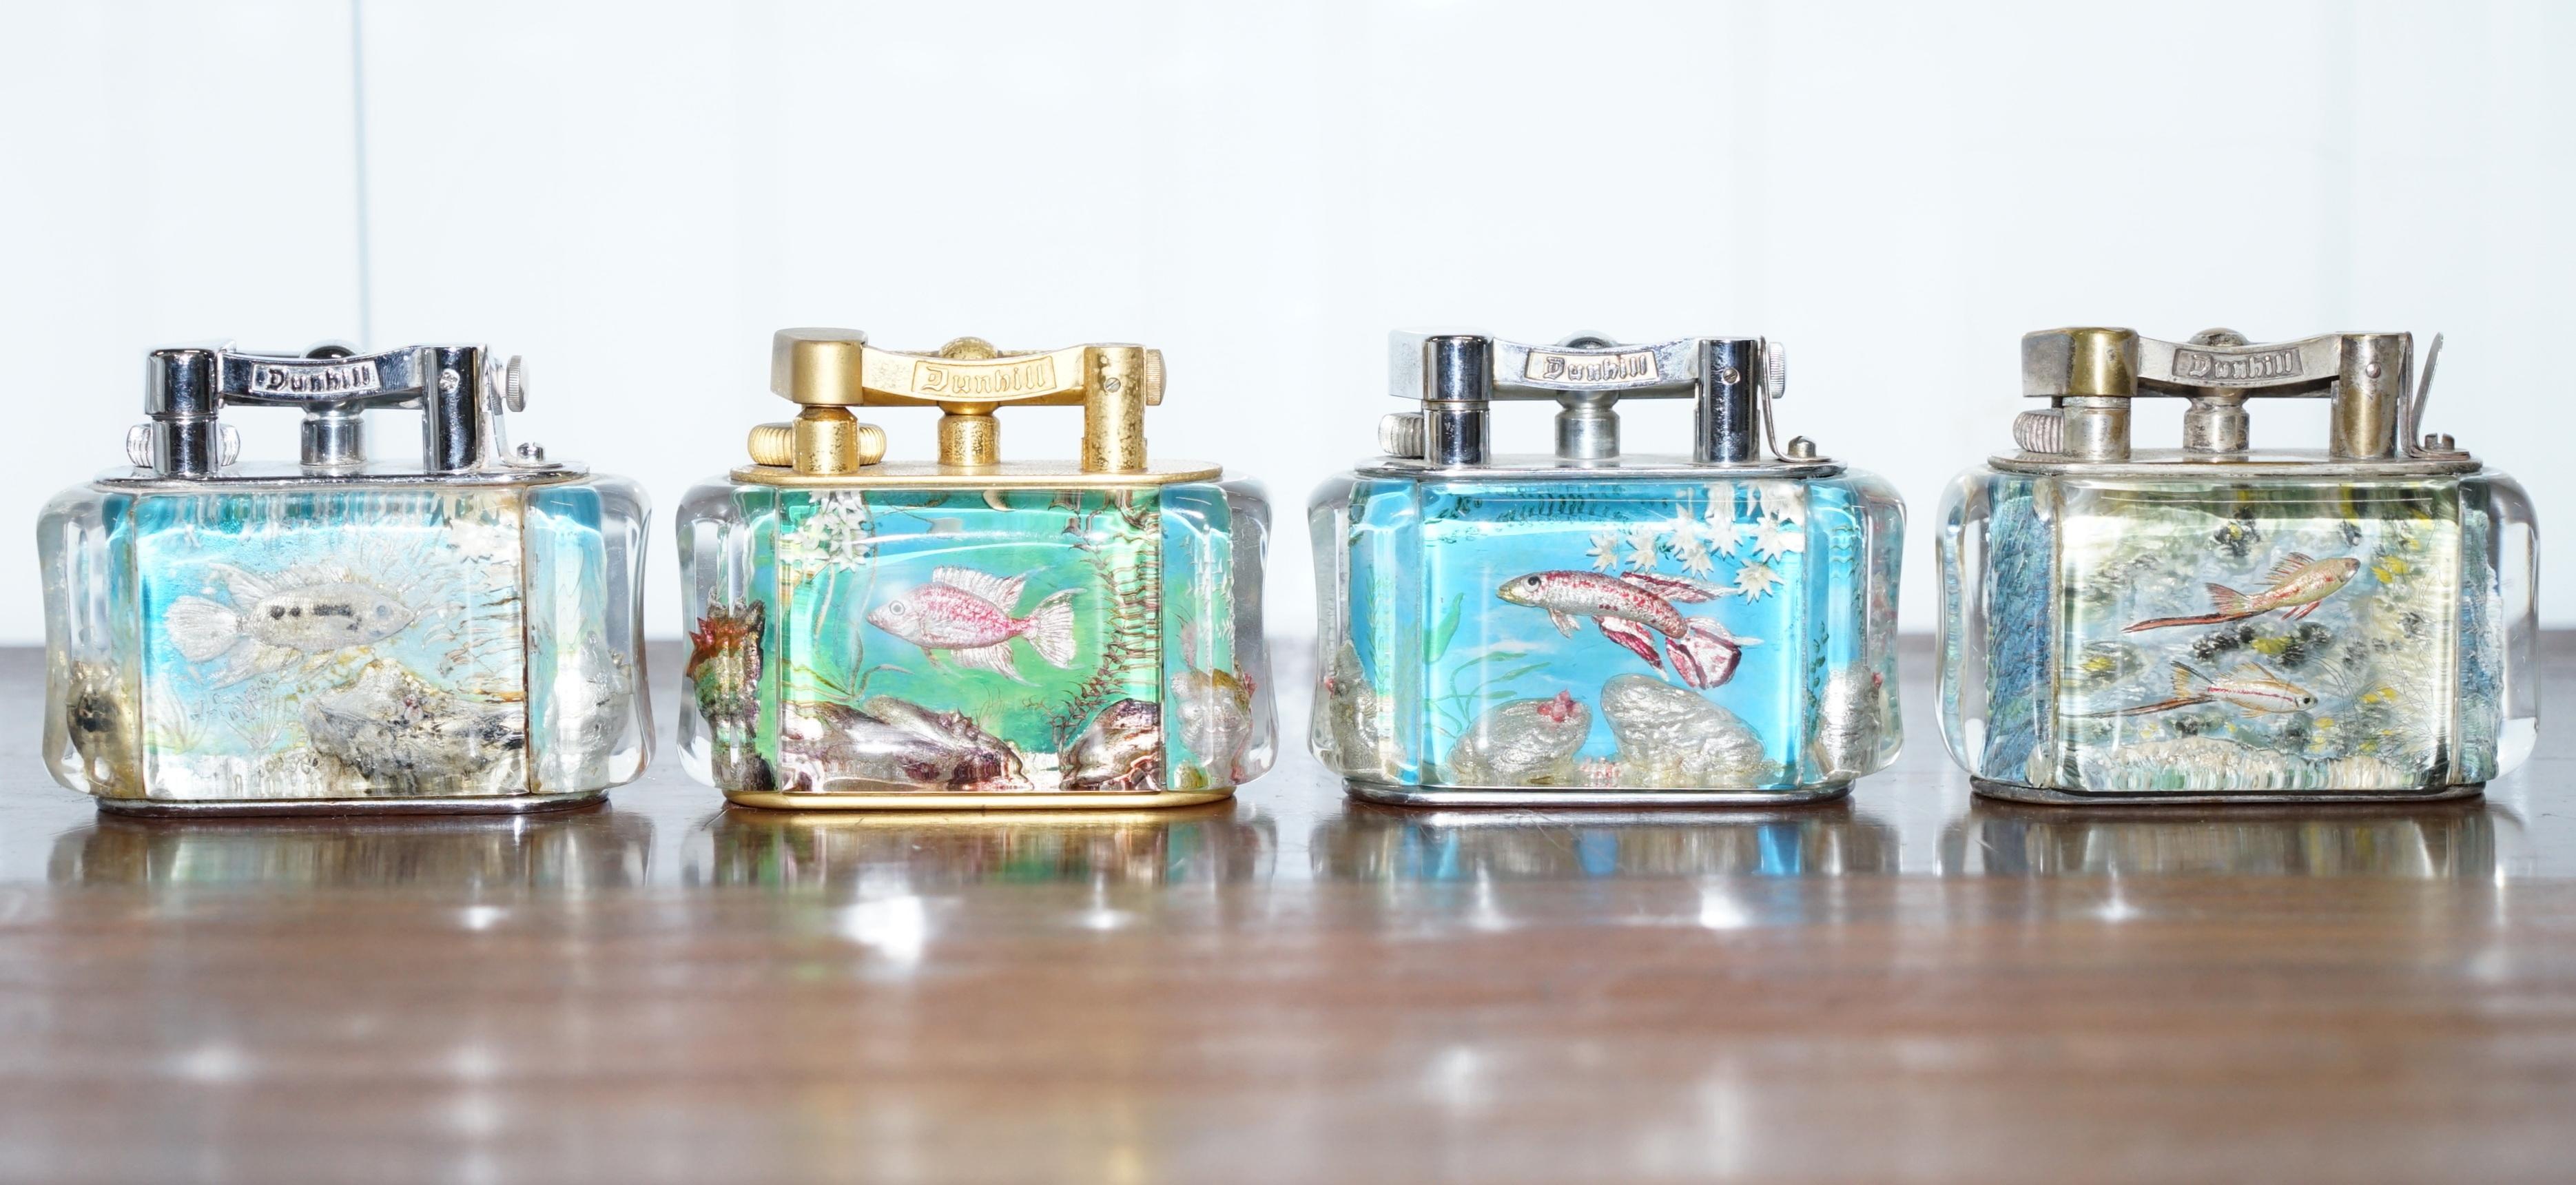 We are delighted to offer for sale is this very rare original 1950s handmade in England oversized Dunhill Aquarium table lighter with gold-plated metal work

I have another four of these at this size and one small on listed on my other